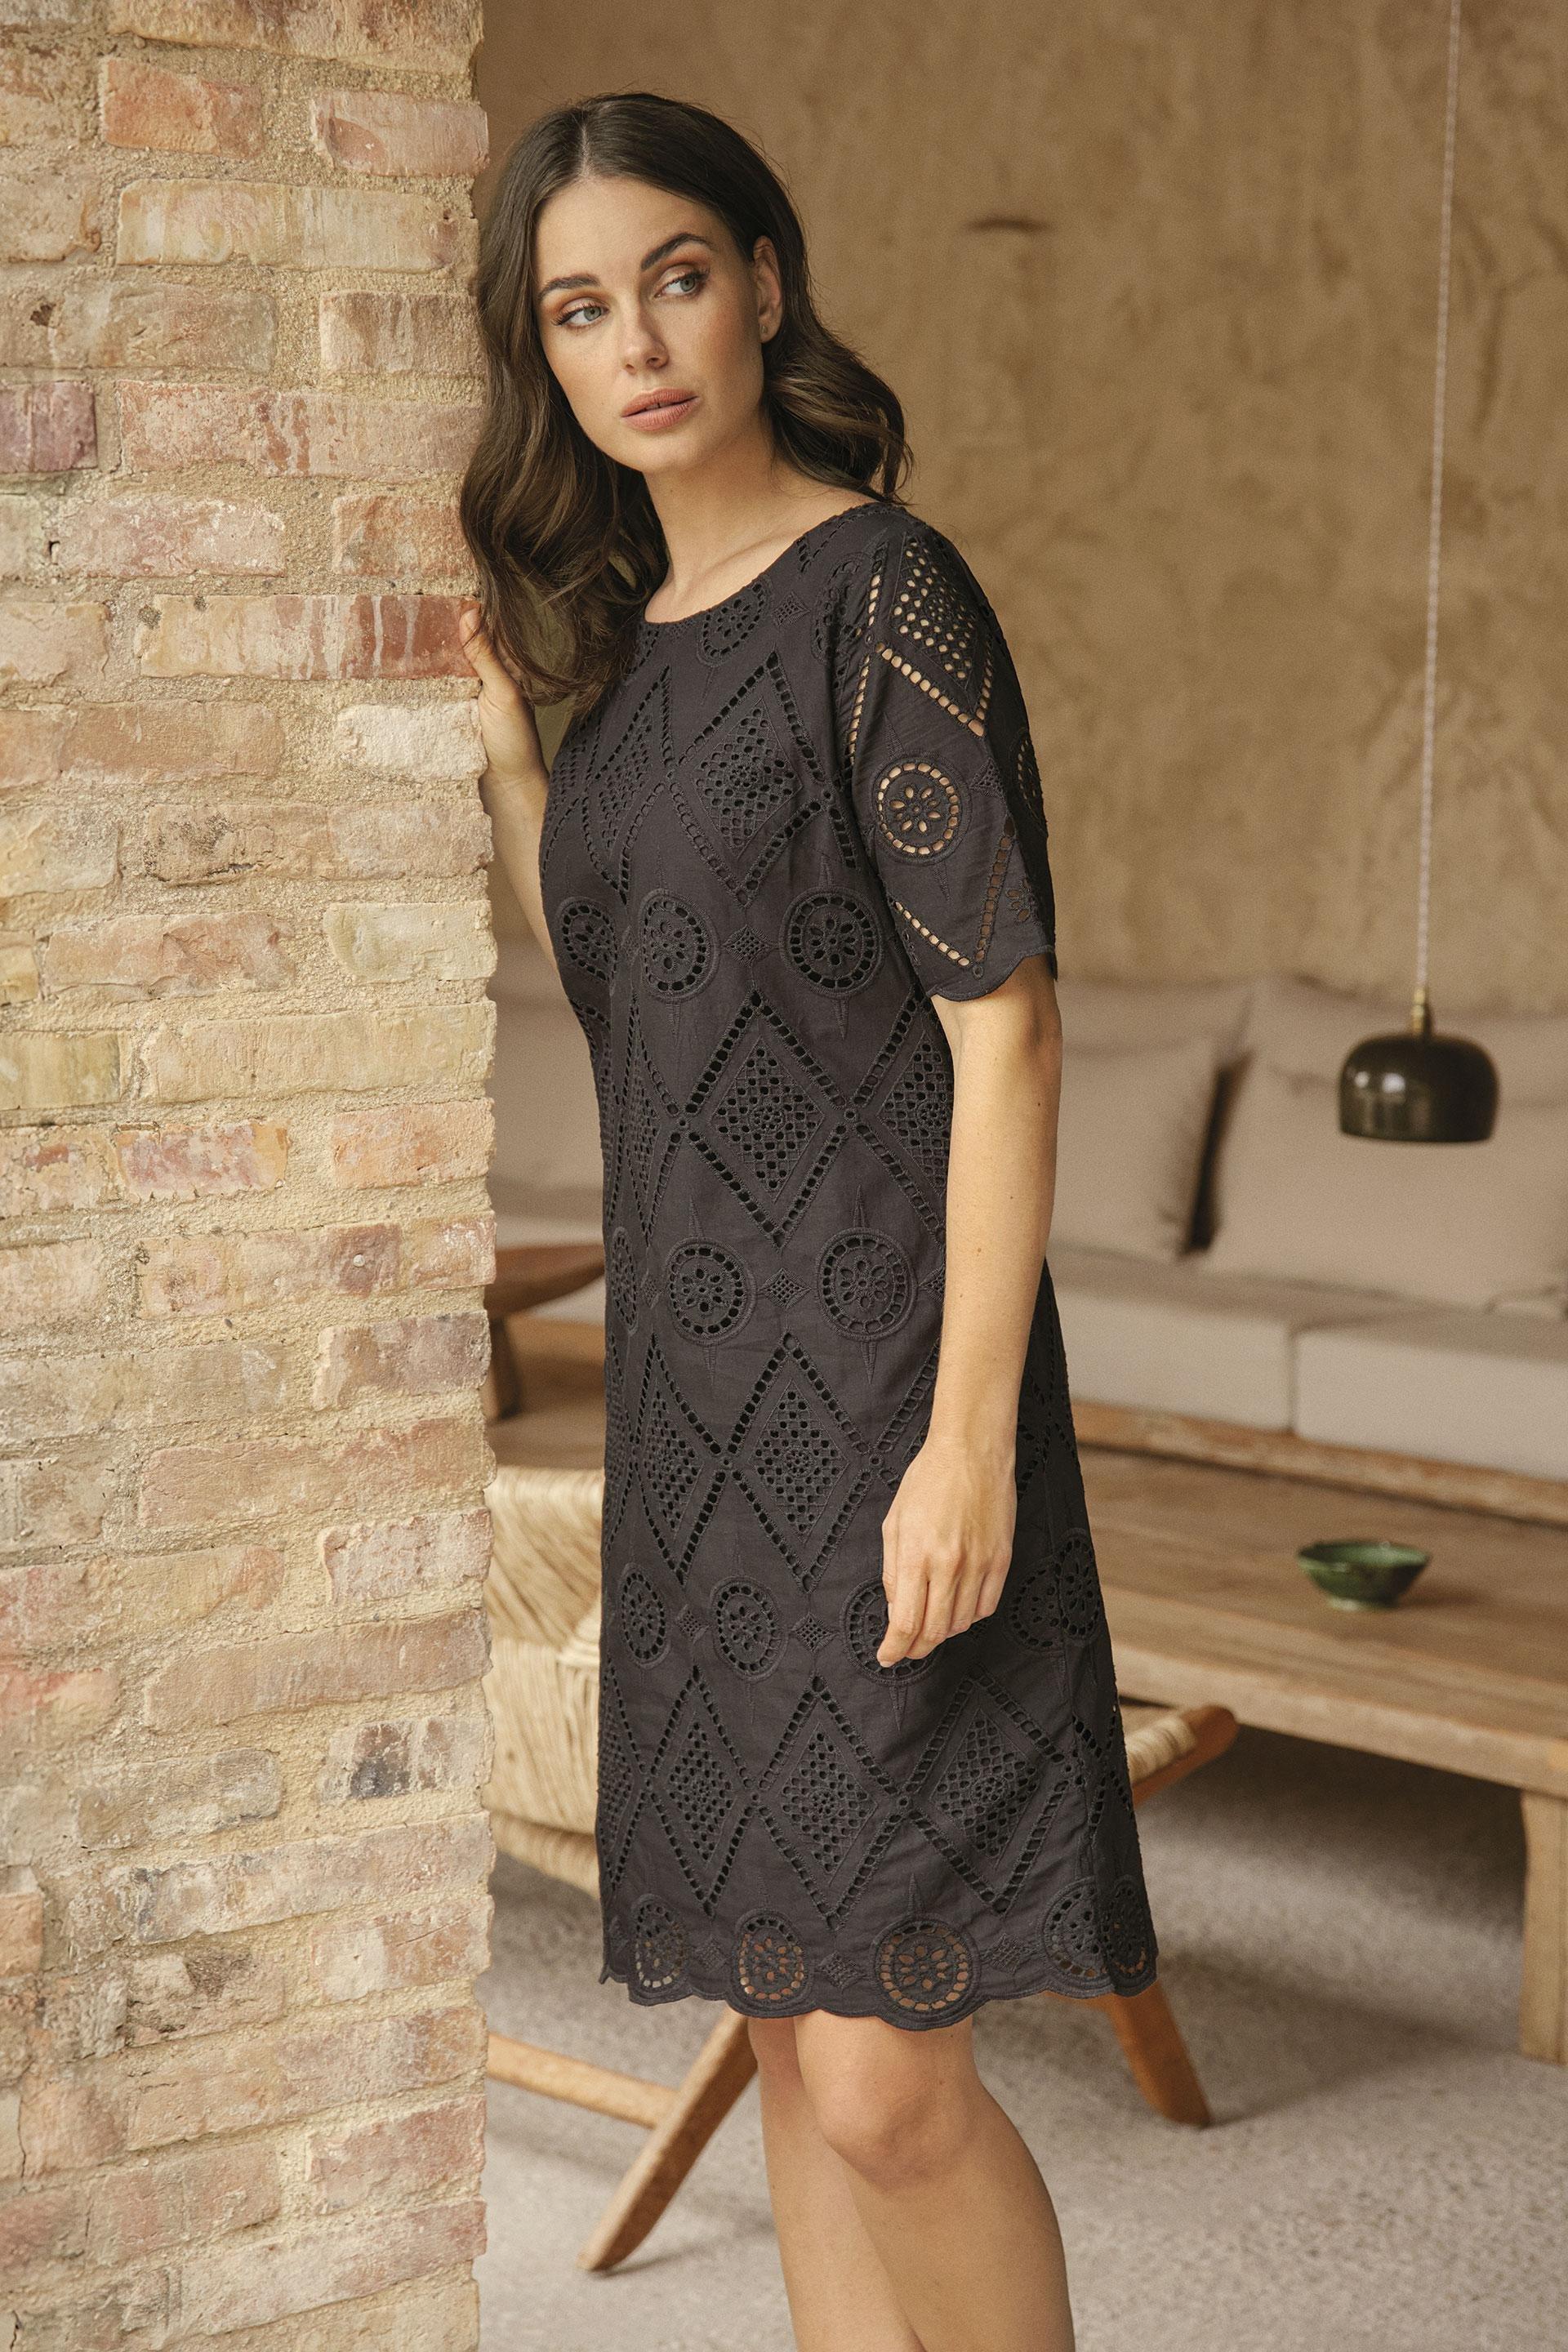 Punt Roma - Black Embroidered Dress